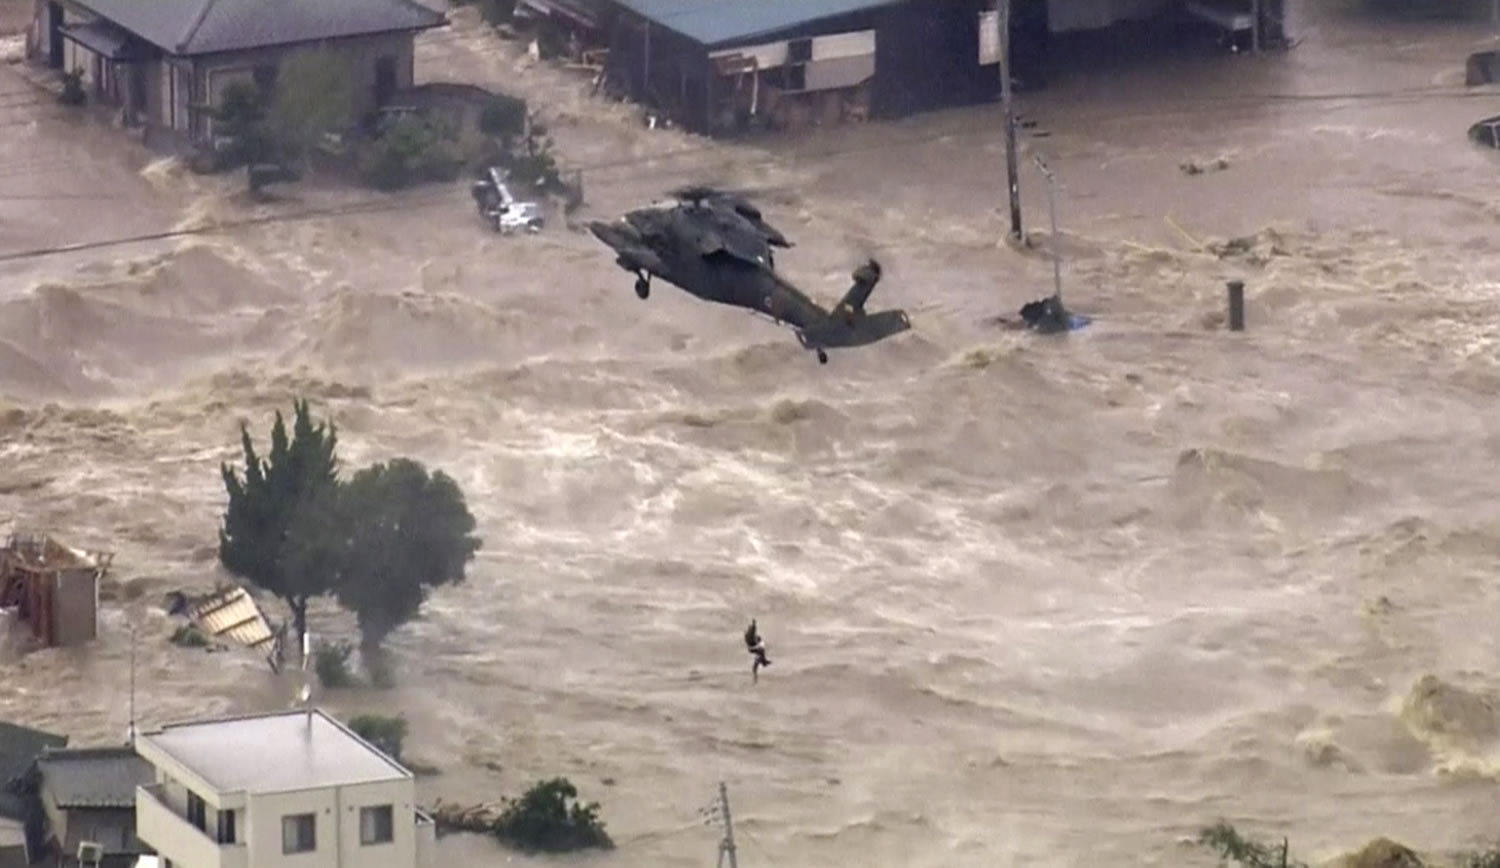 In this photo taken from video provided by Japan's Tokyo Broadcasting System television network, a man, who was stranded in the middle of raging floodwaters, is rescued by a military helicopter in Joso, Ibaraki prefecture Thursday. Raging floodwaters broke through a berm Thursday and swamped the city near Tokyo, washing away houses, forcing dozens of people to rooftops to await helicopter rescues and leaving one man clinging for his life to a utility pole.